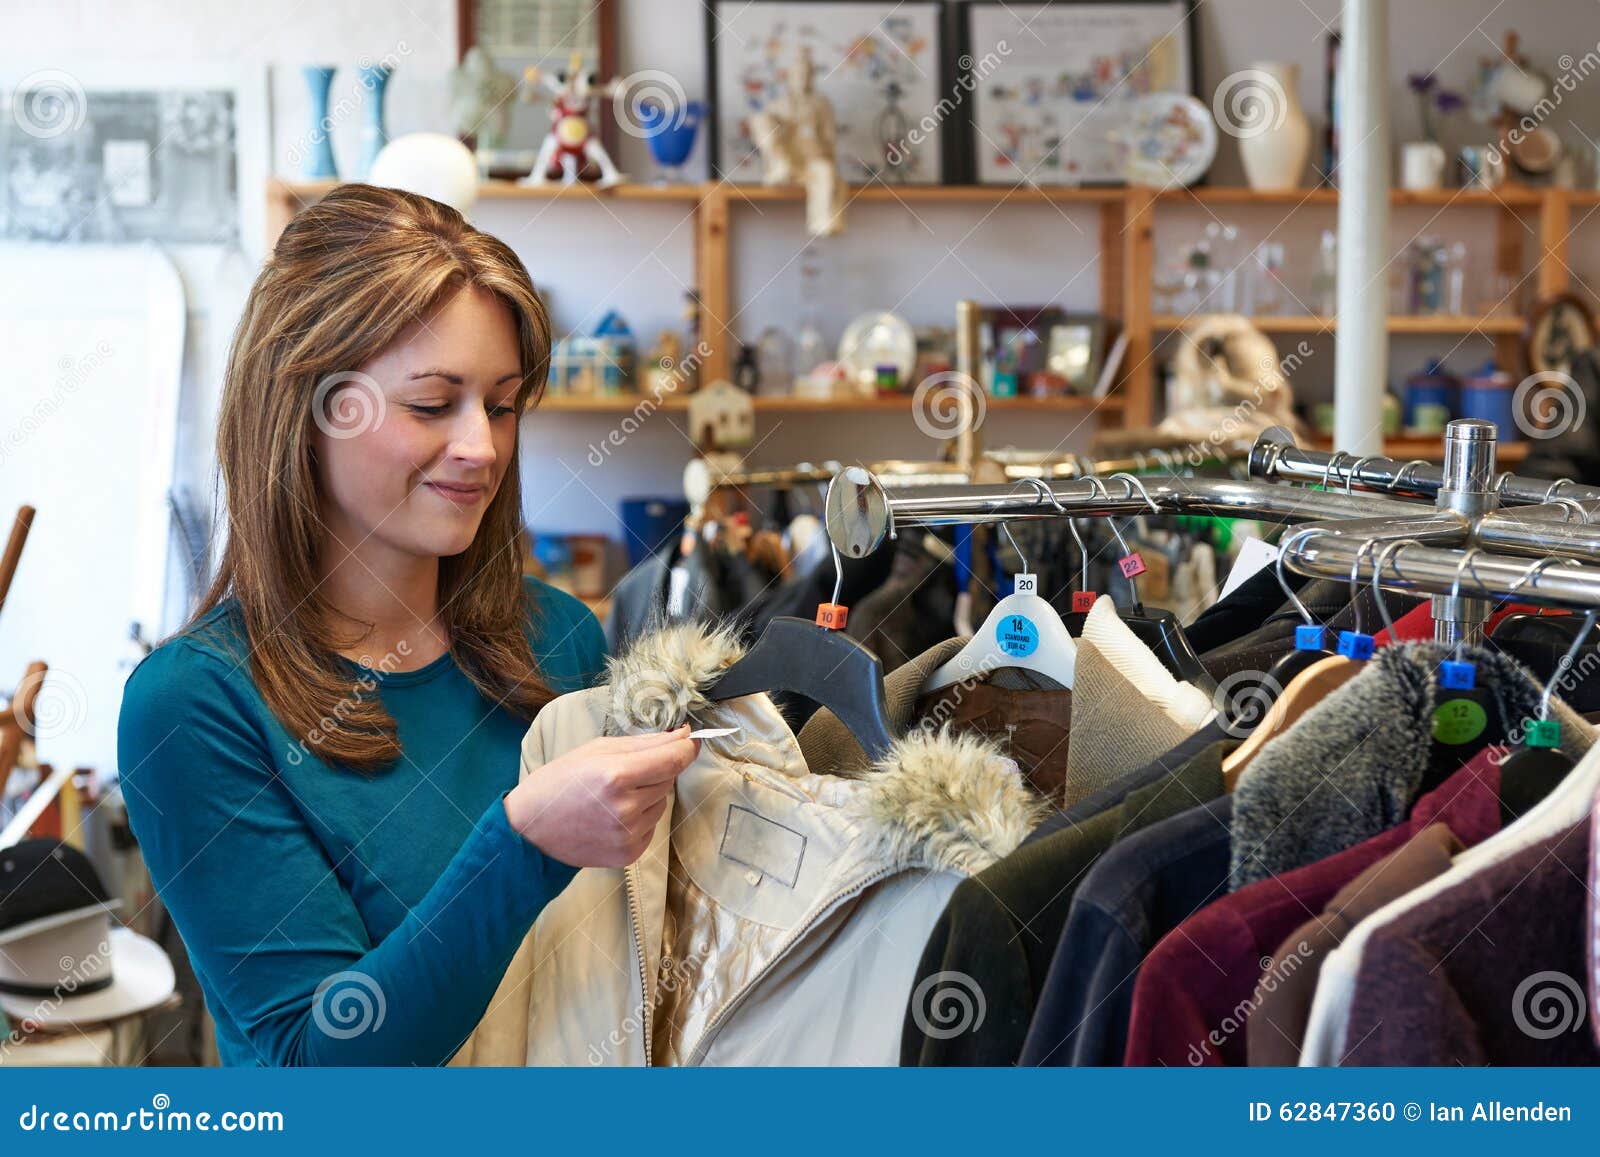 female shopper in thrift store looking at clothes